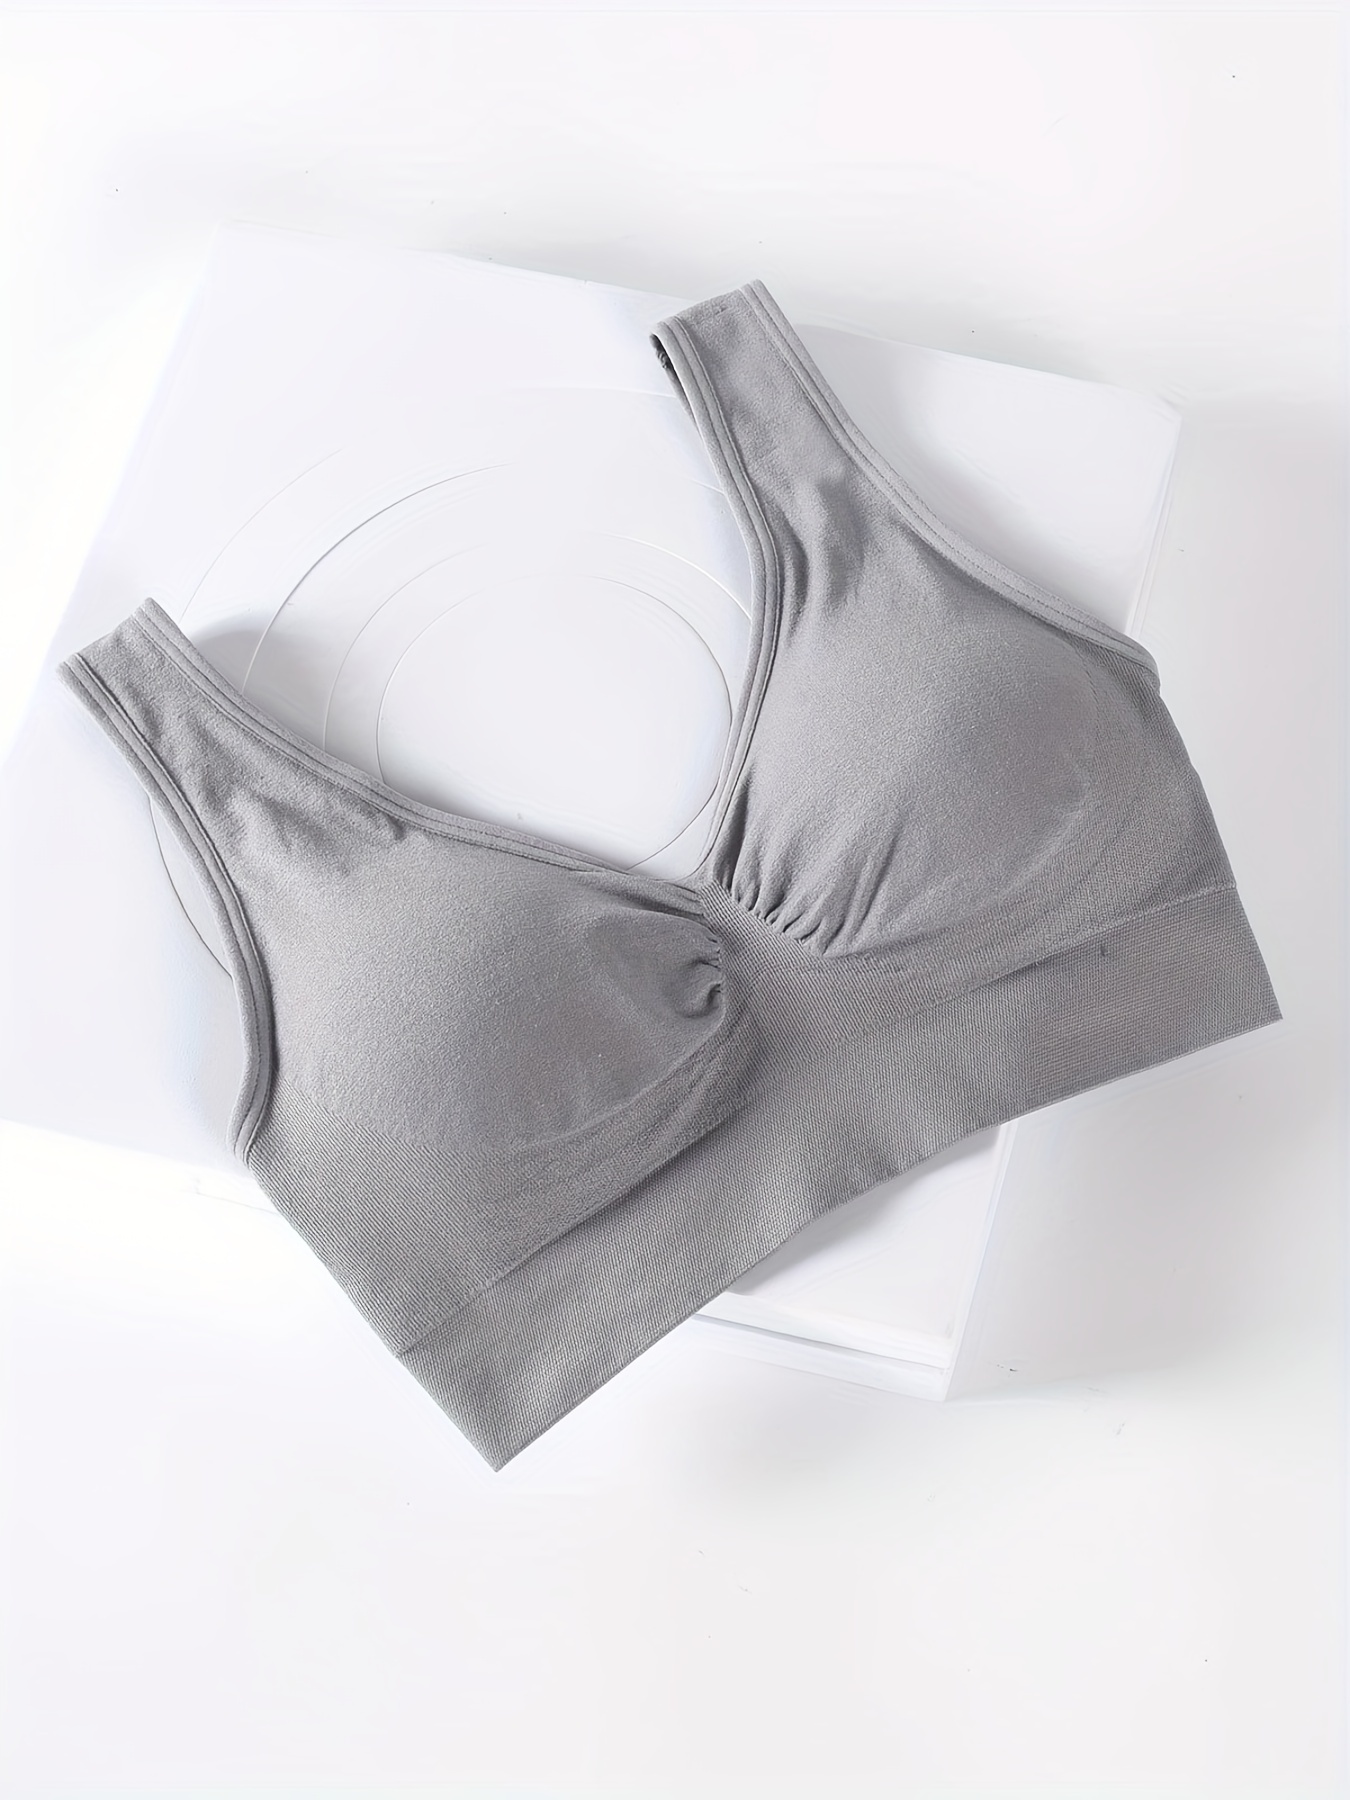 Women's Genie Bra Seamless 3-Pack - Solid Color Comfort Sports